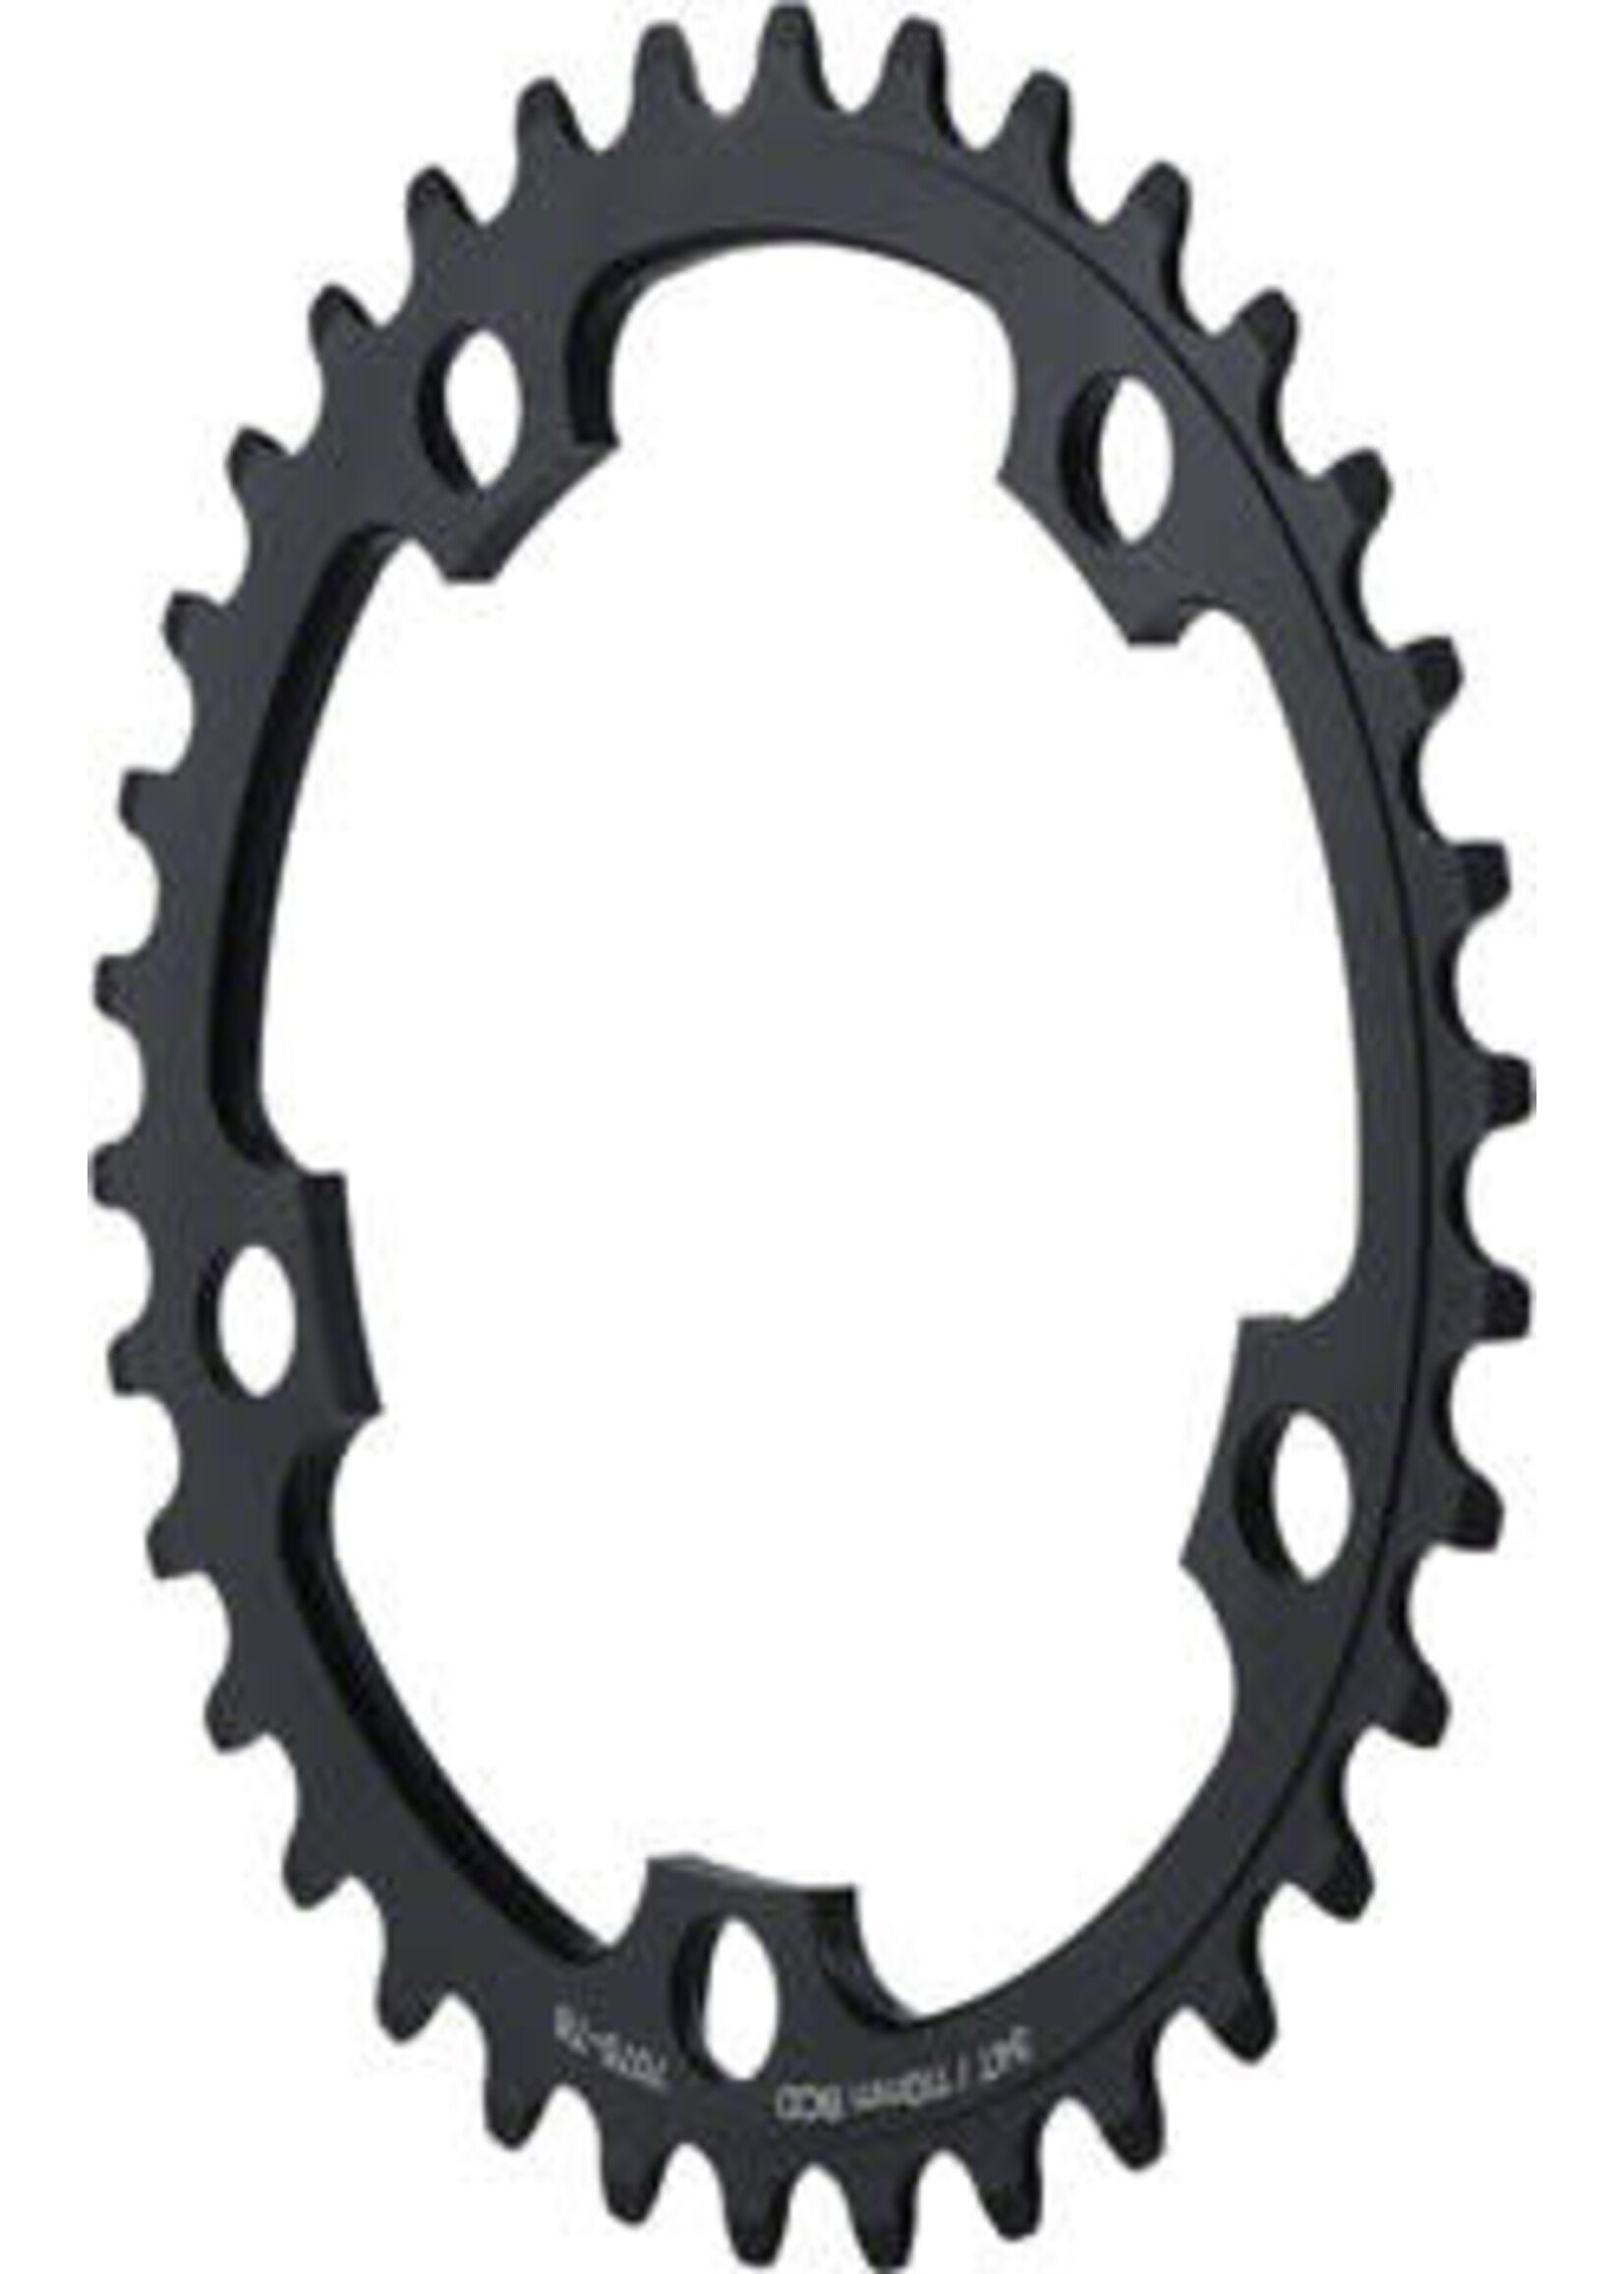 Dimension Dimension Chainring - 34T, 110mm BCD, Middle, Black